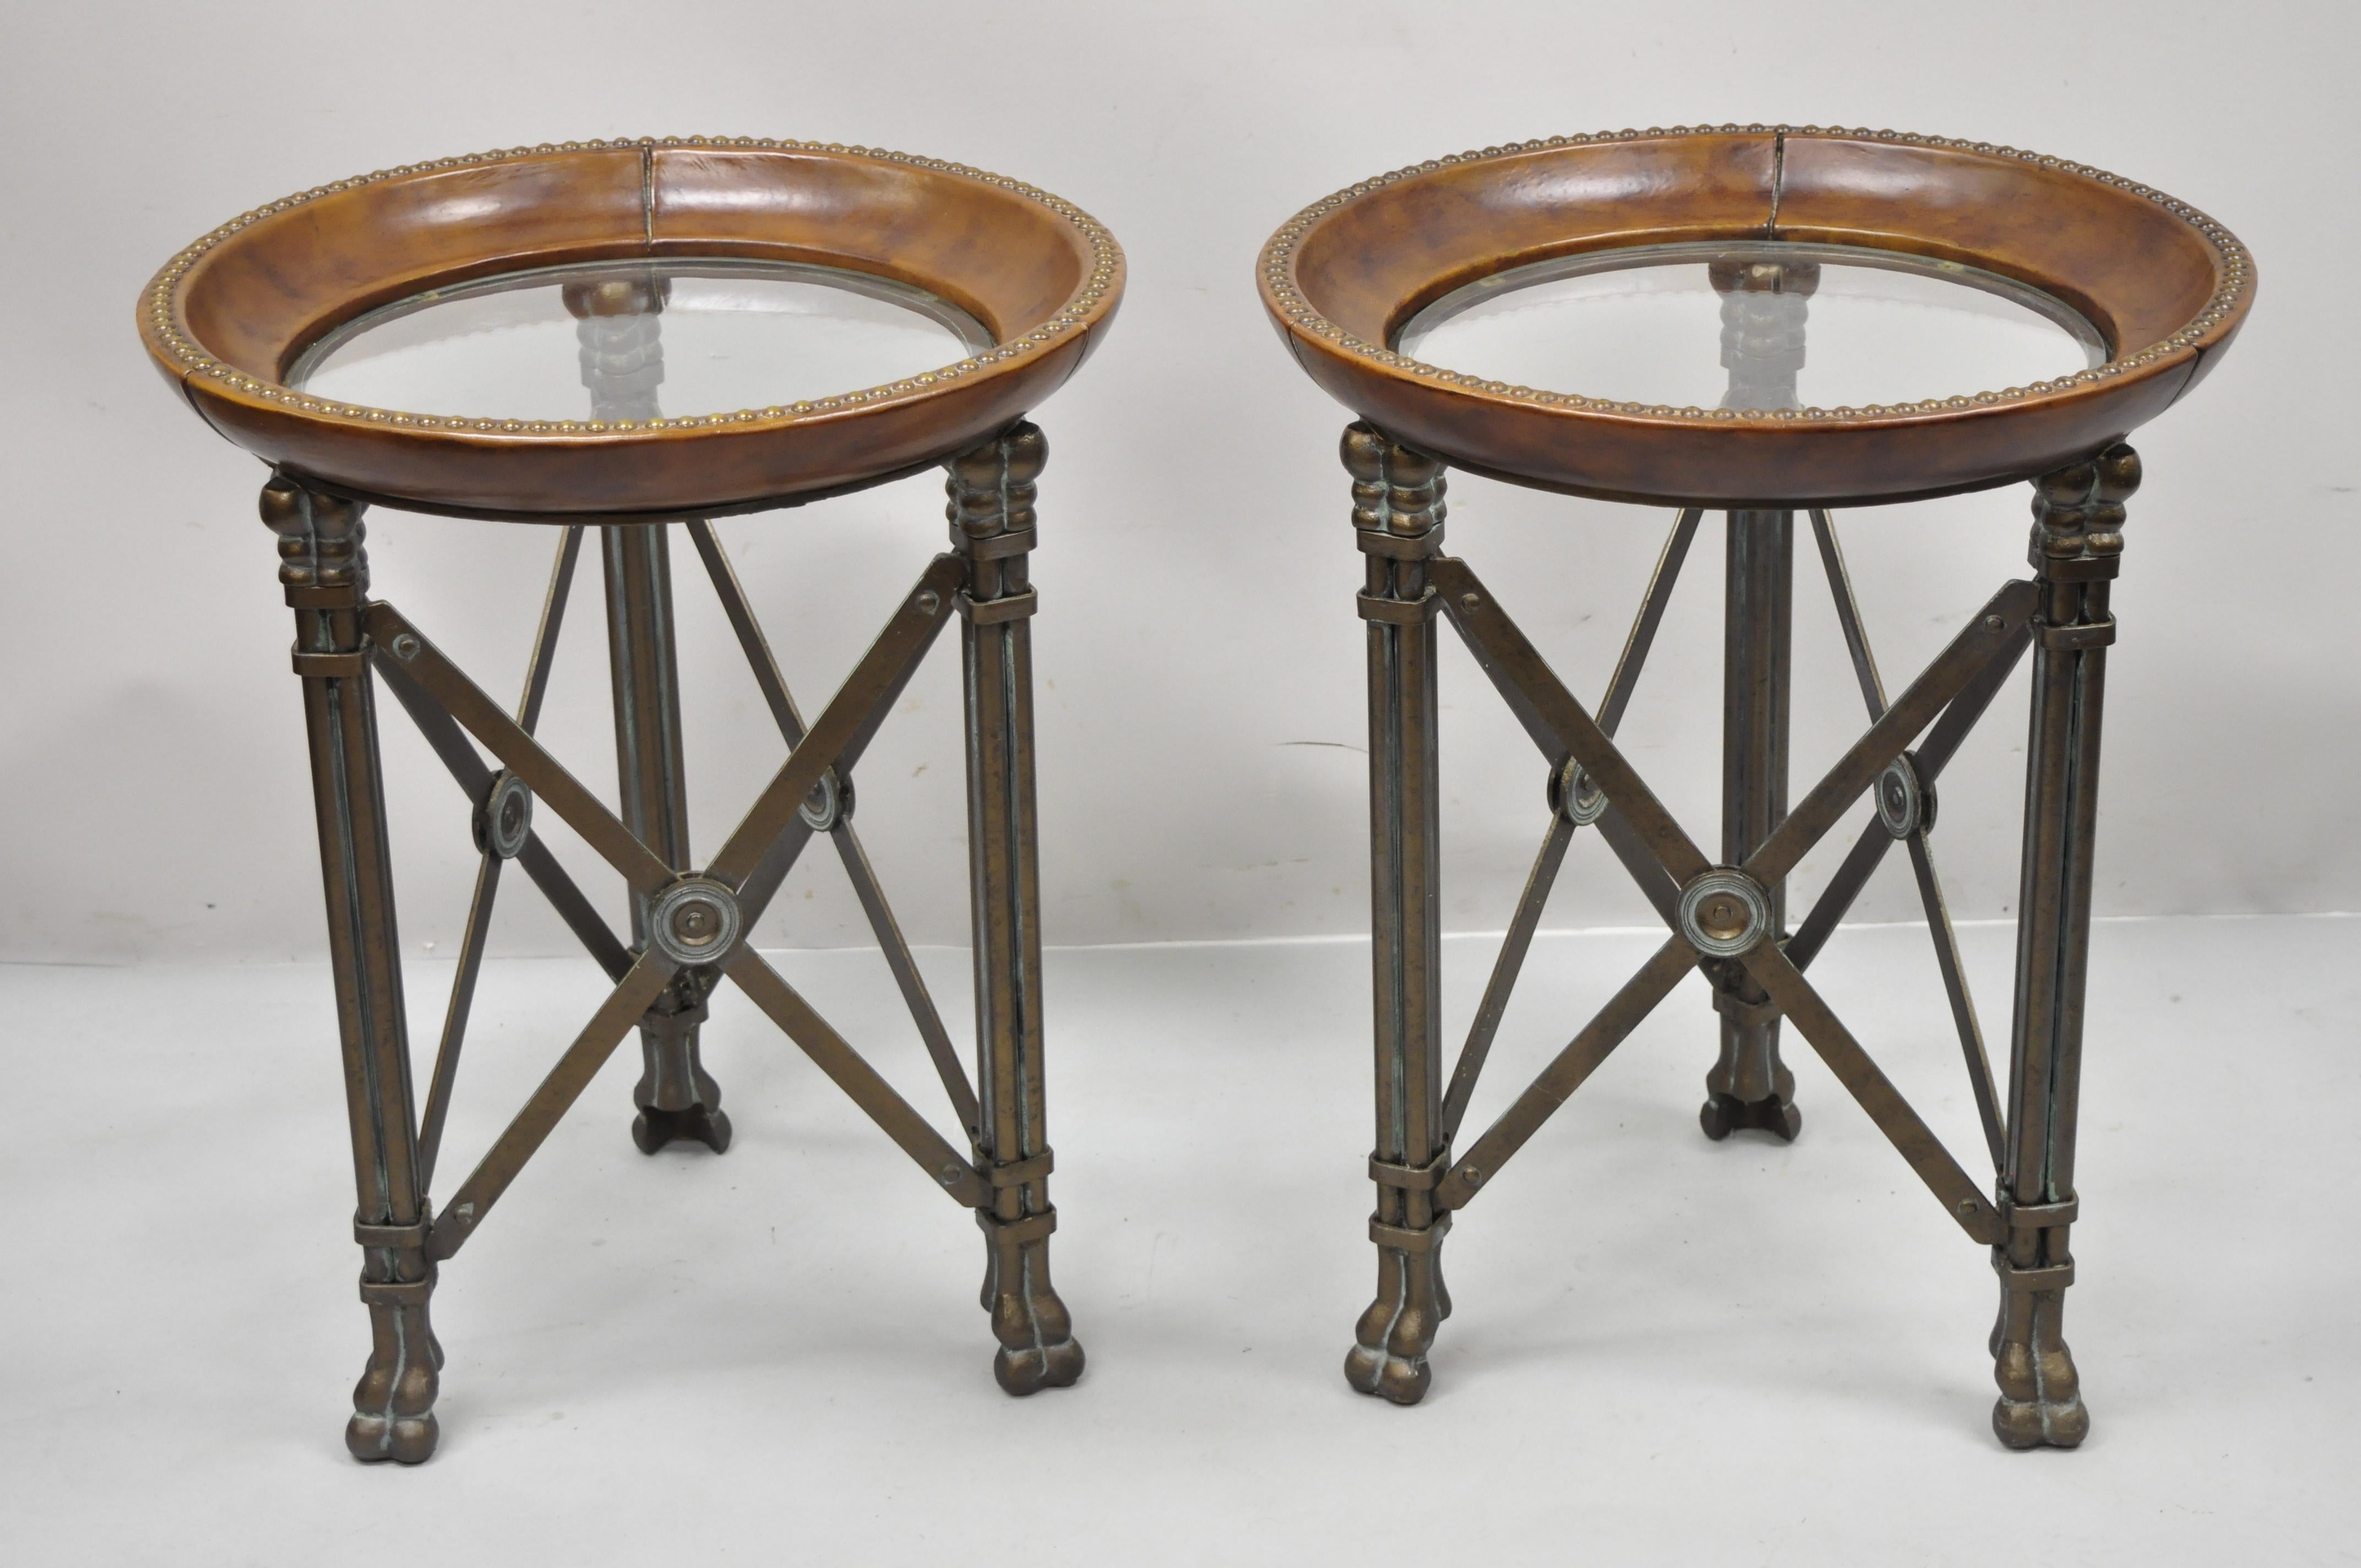 Regency iron brown leather round glass top end tables attributed to Maitland Smith - a Pair. Item features metal stretcher base with paw feet, brown leather rim, round glass top, heavy metal frame, American craftsmanship, great style and form. Circa